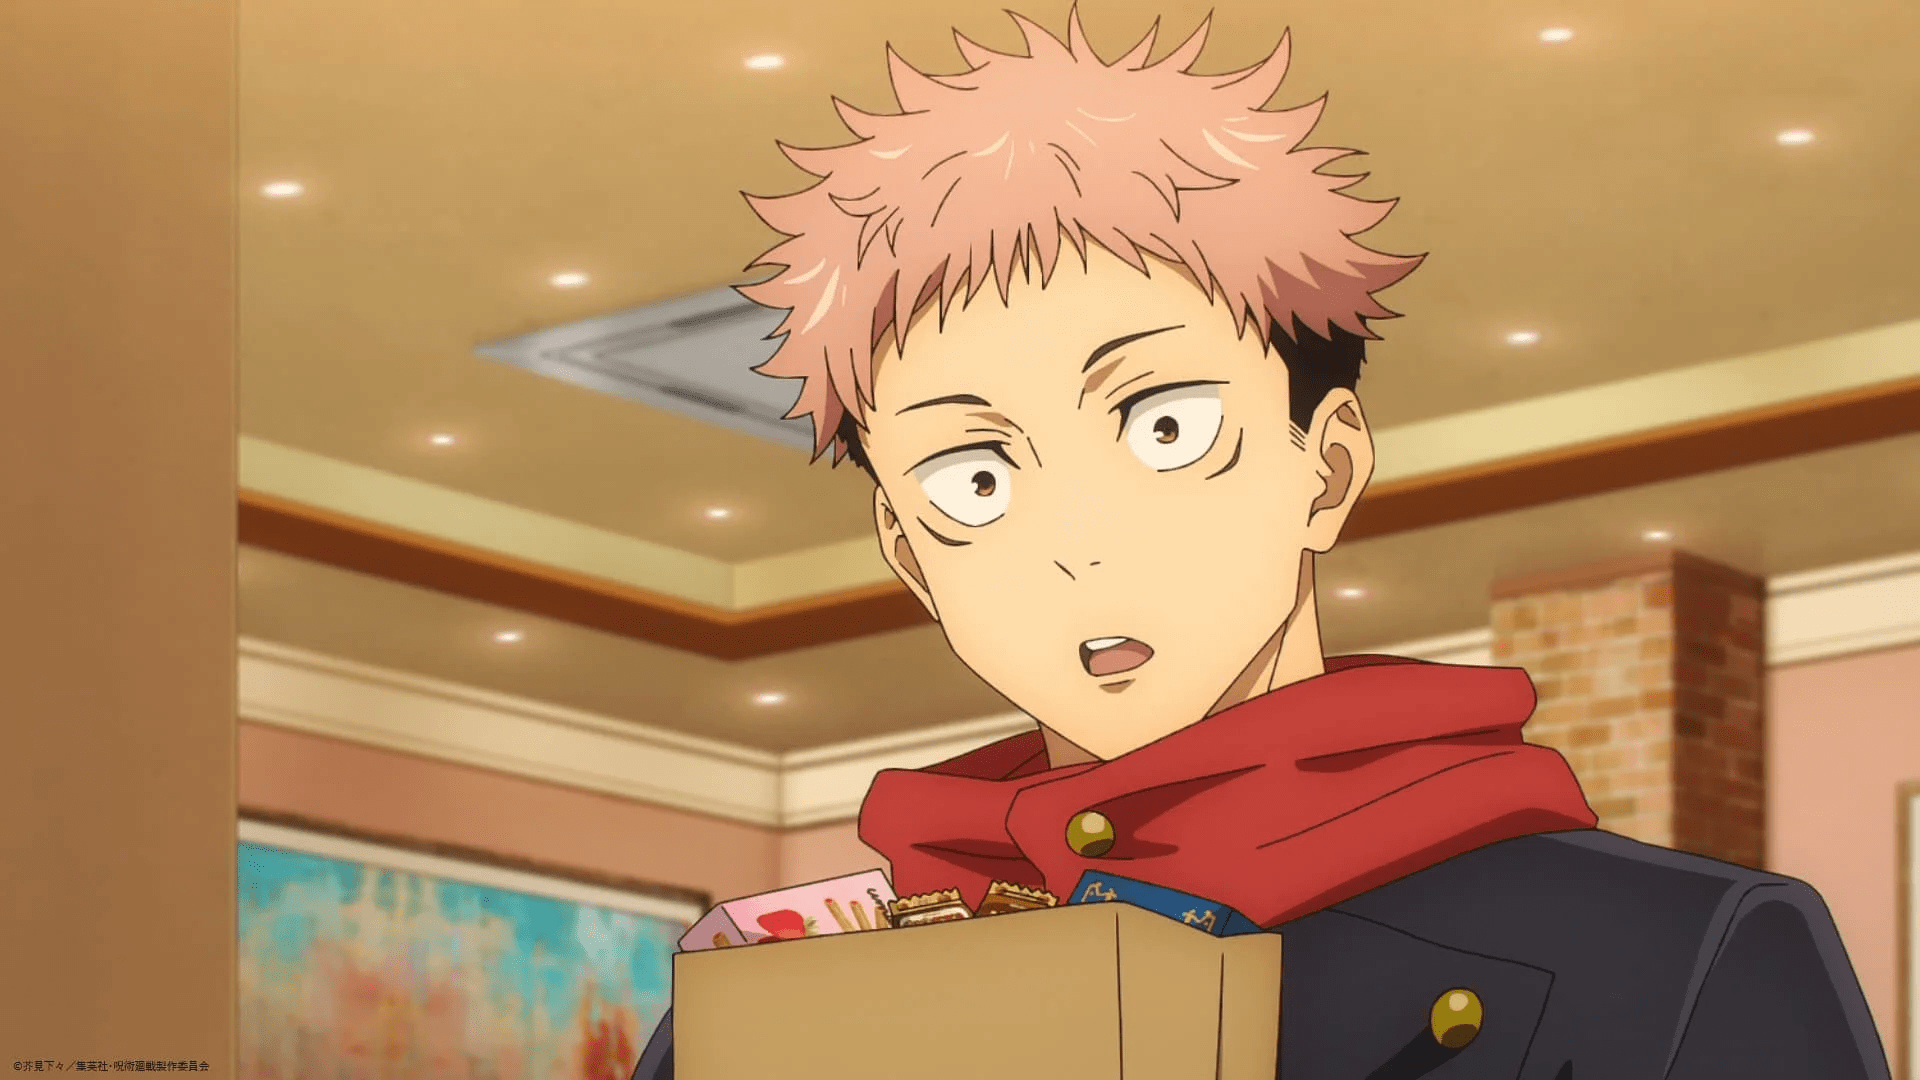 jujutsu kaisen season 2 episode 10: Release Date & Time, Countdown, Voice cast, What to expect?